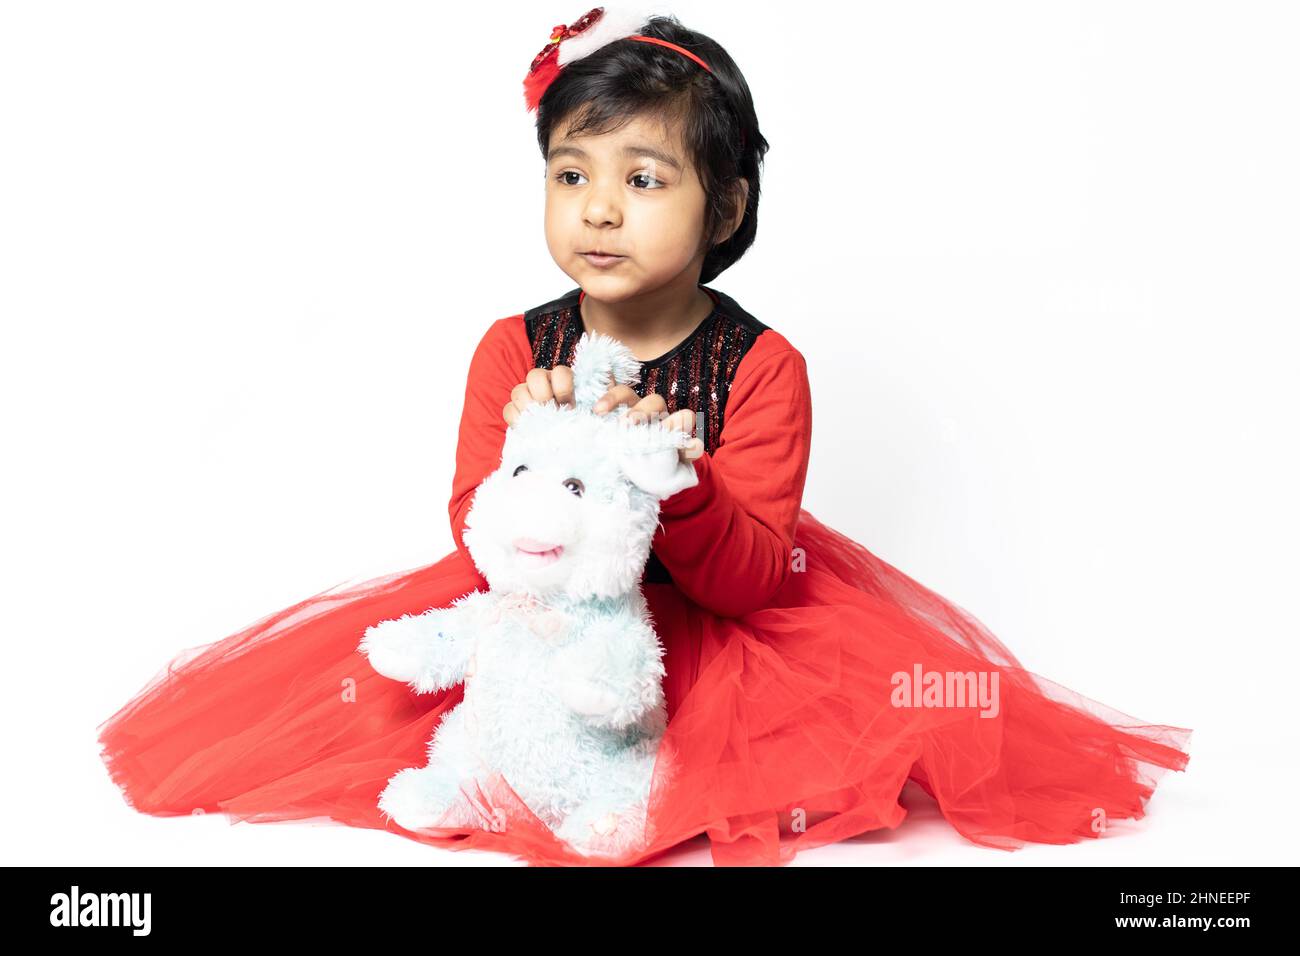 Cute Asian Indian Girl Playing With Soft Toy. Isolated On White Background. Fun, Activity, Kindergarten, Birthday, Engagement, Childhood, Leisure Stock Photo